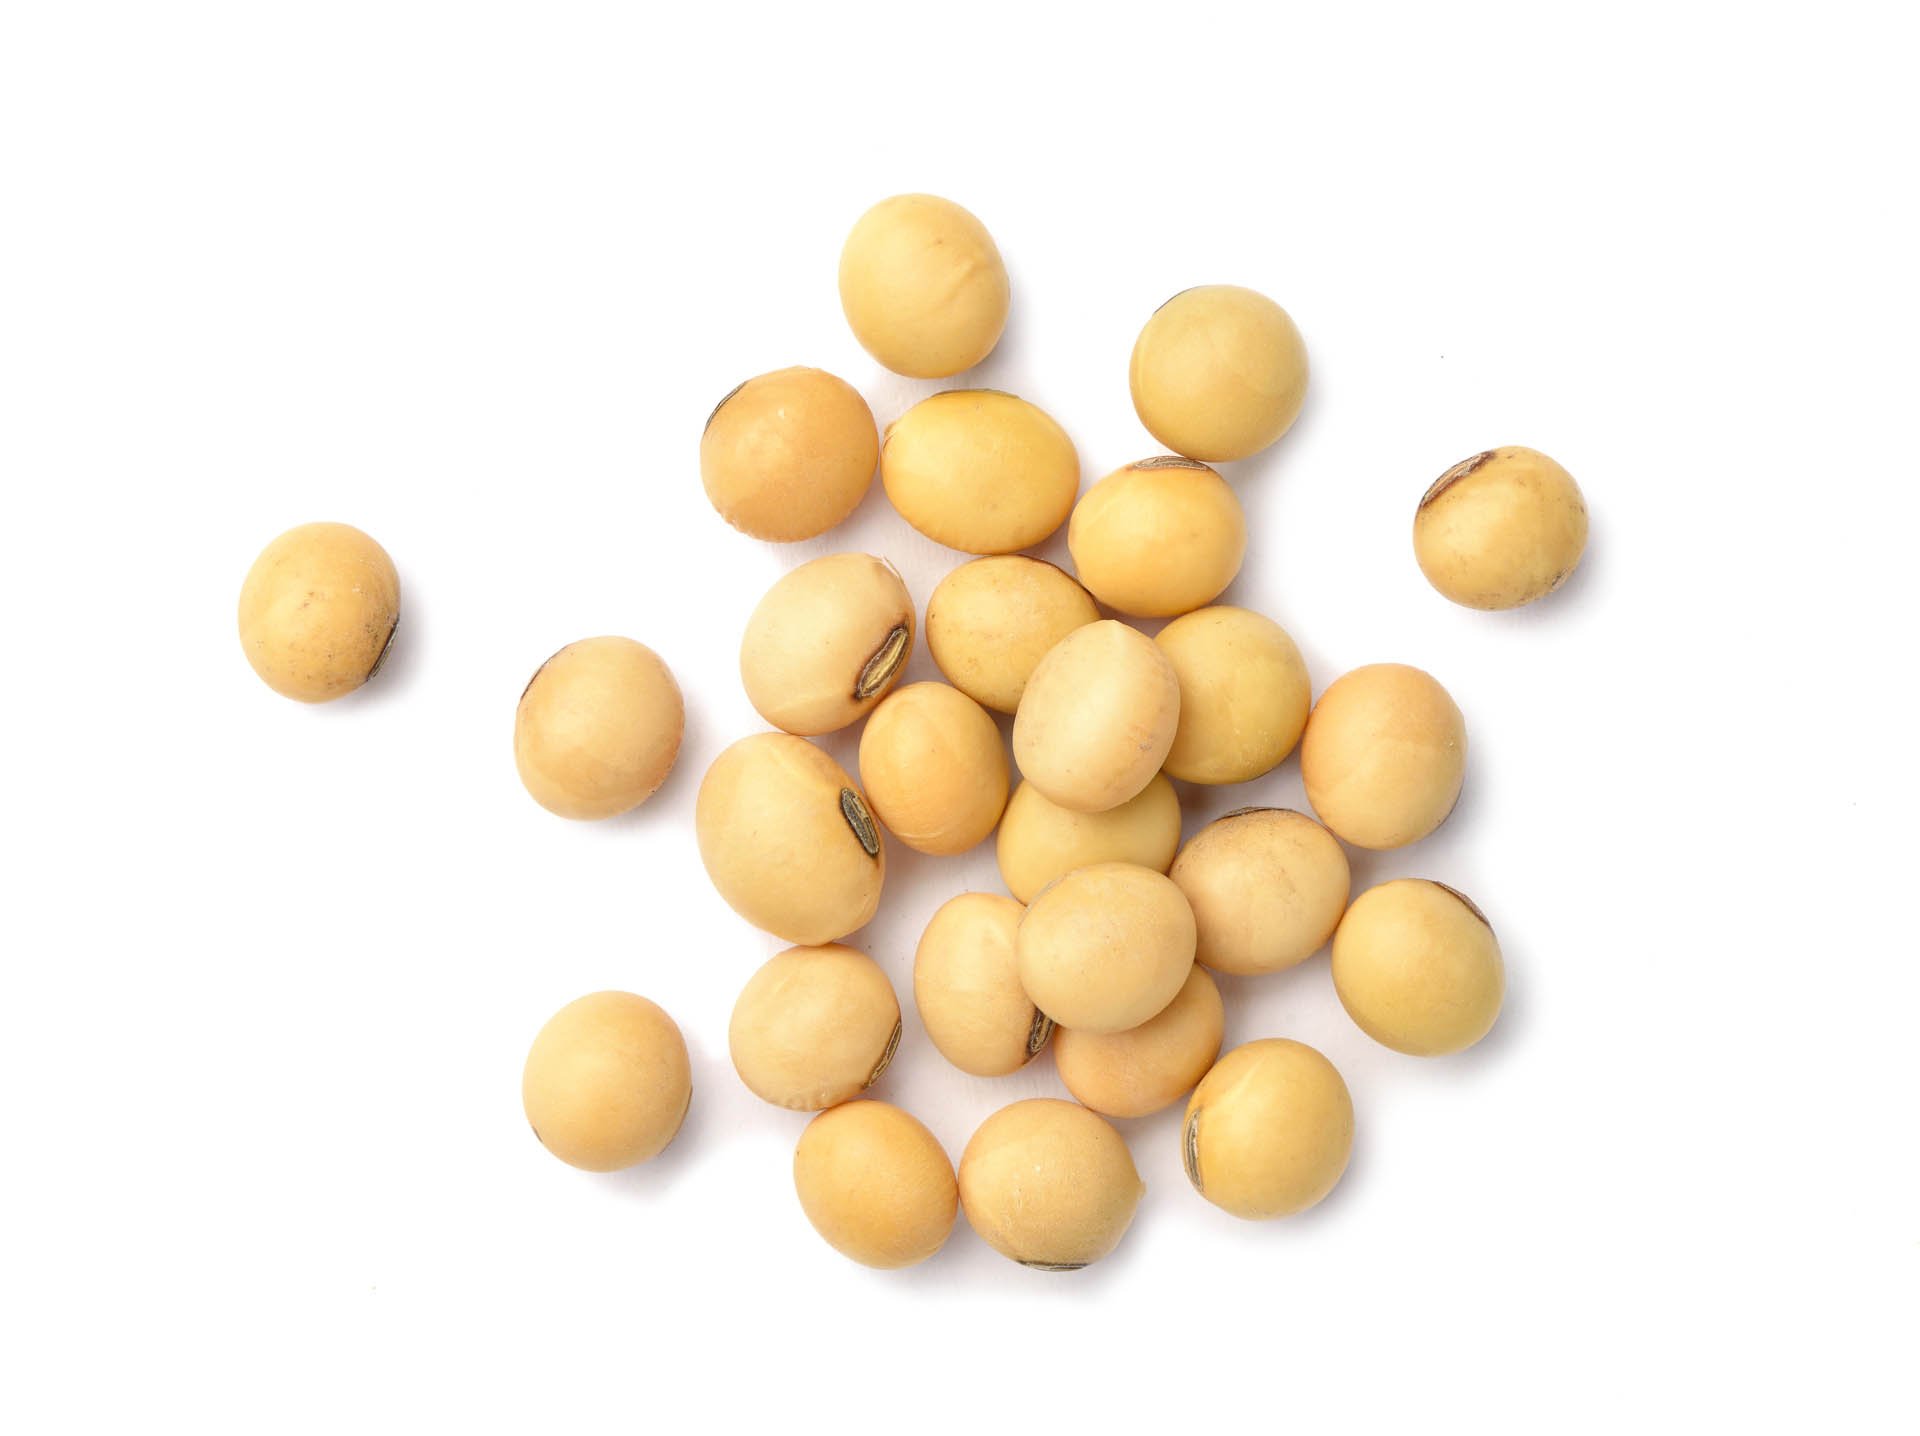 Soybeans-in-Shell